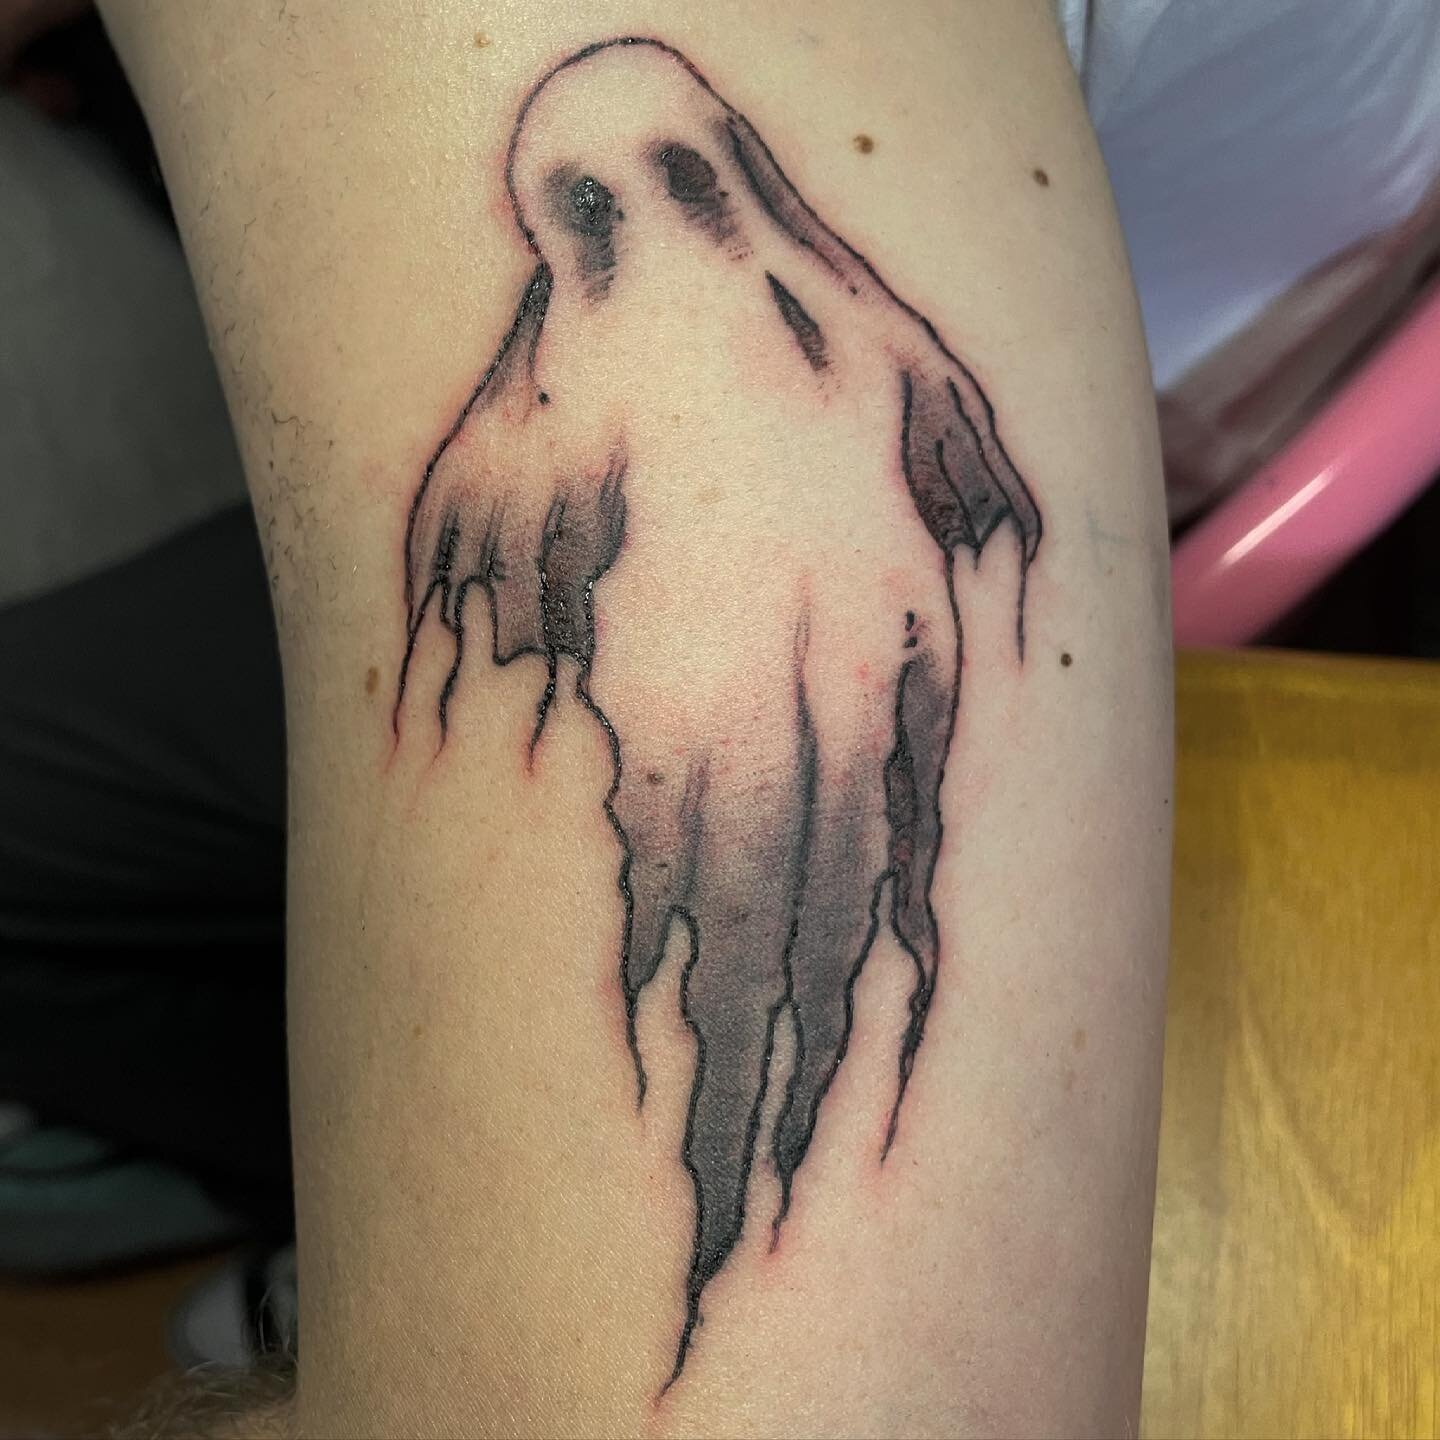 Peaceful, but creepy ghost. This was fun to tattoo. Thank you Jake for trusting me your arm! ✨🖤